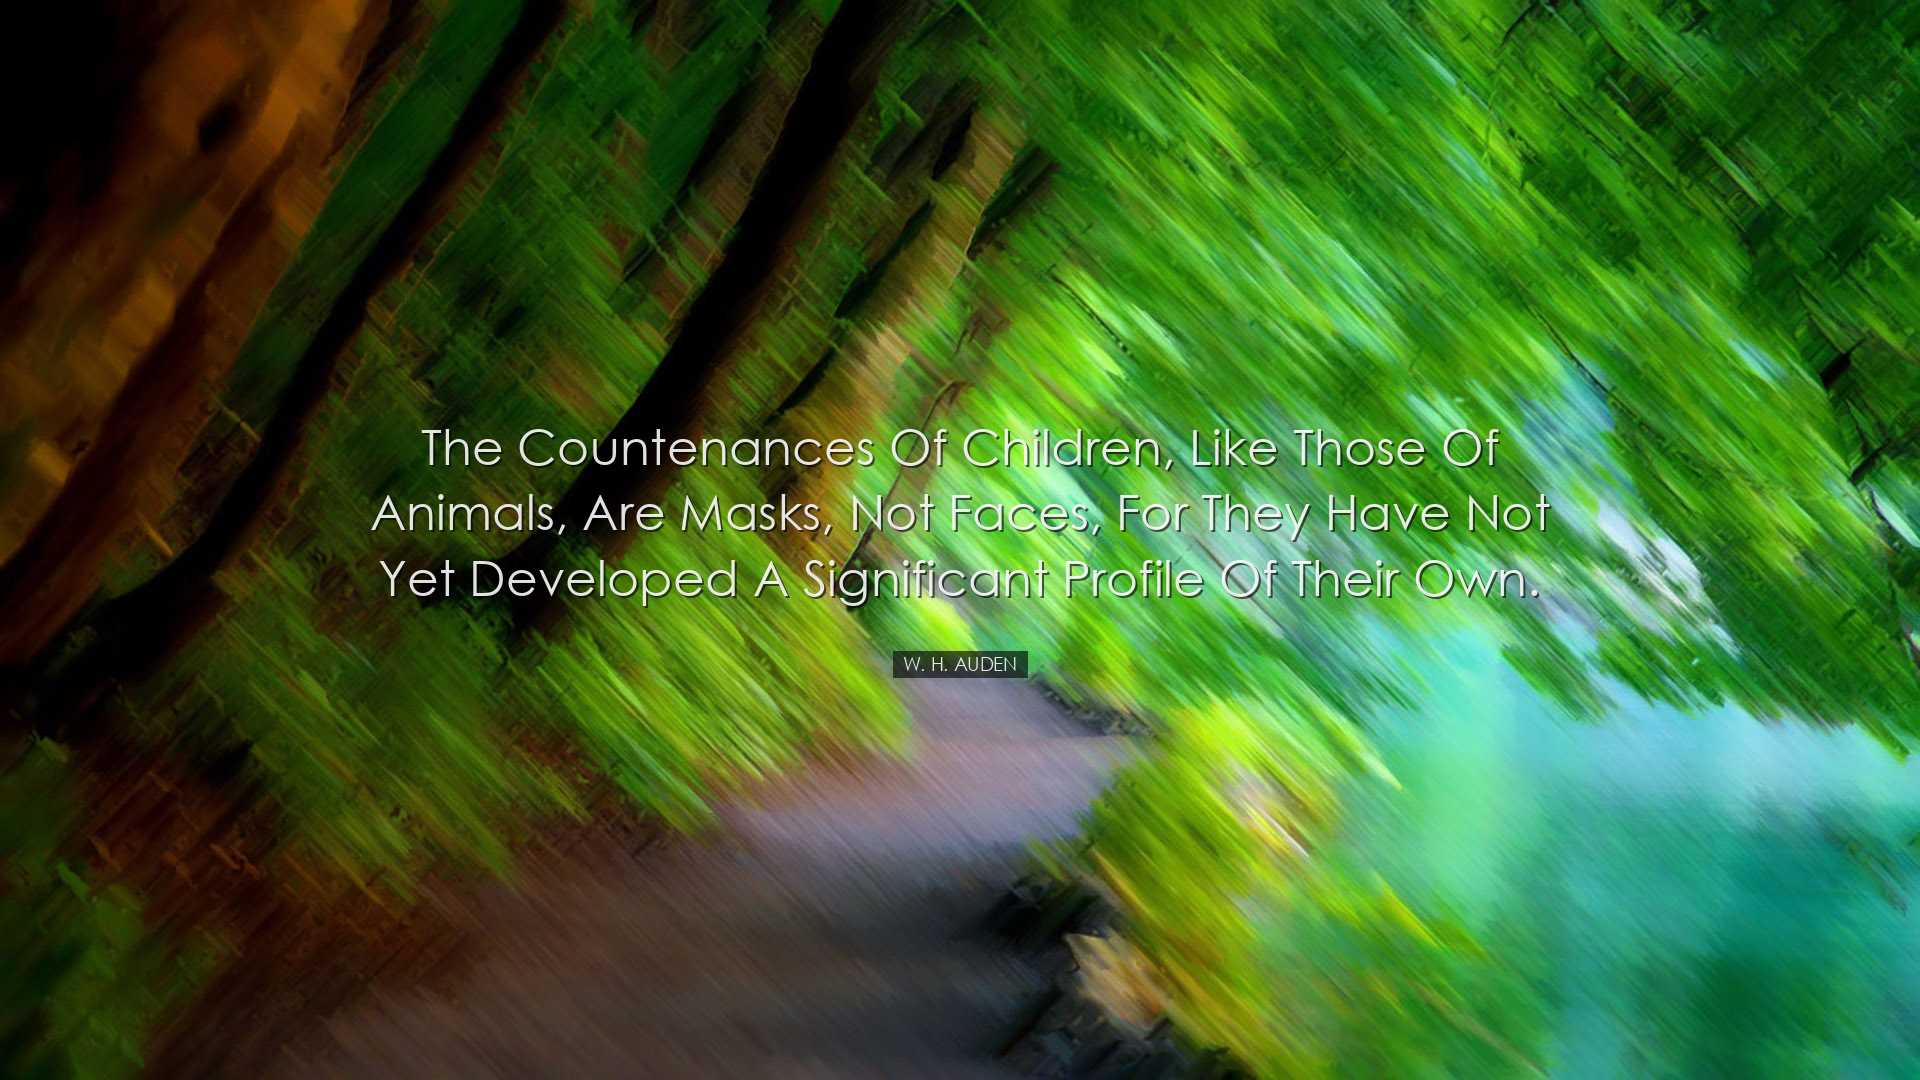 The countenances of children, like those of animals, are masks, no